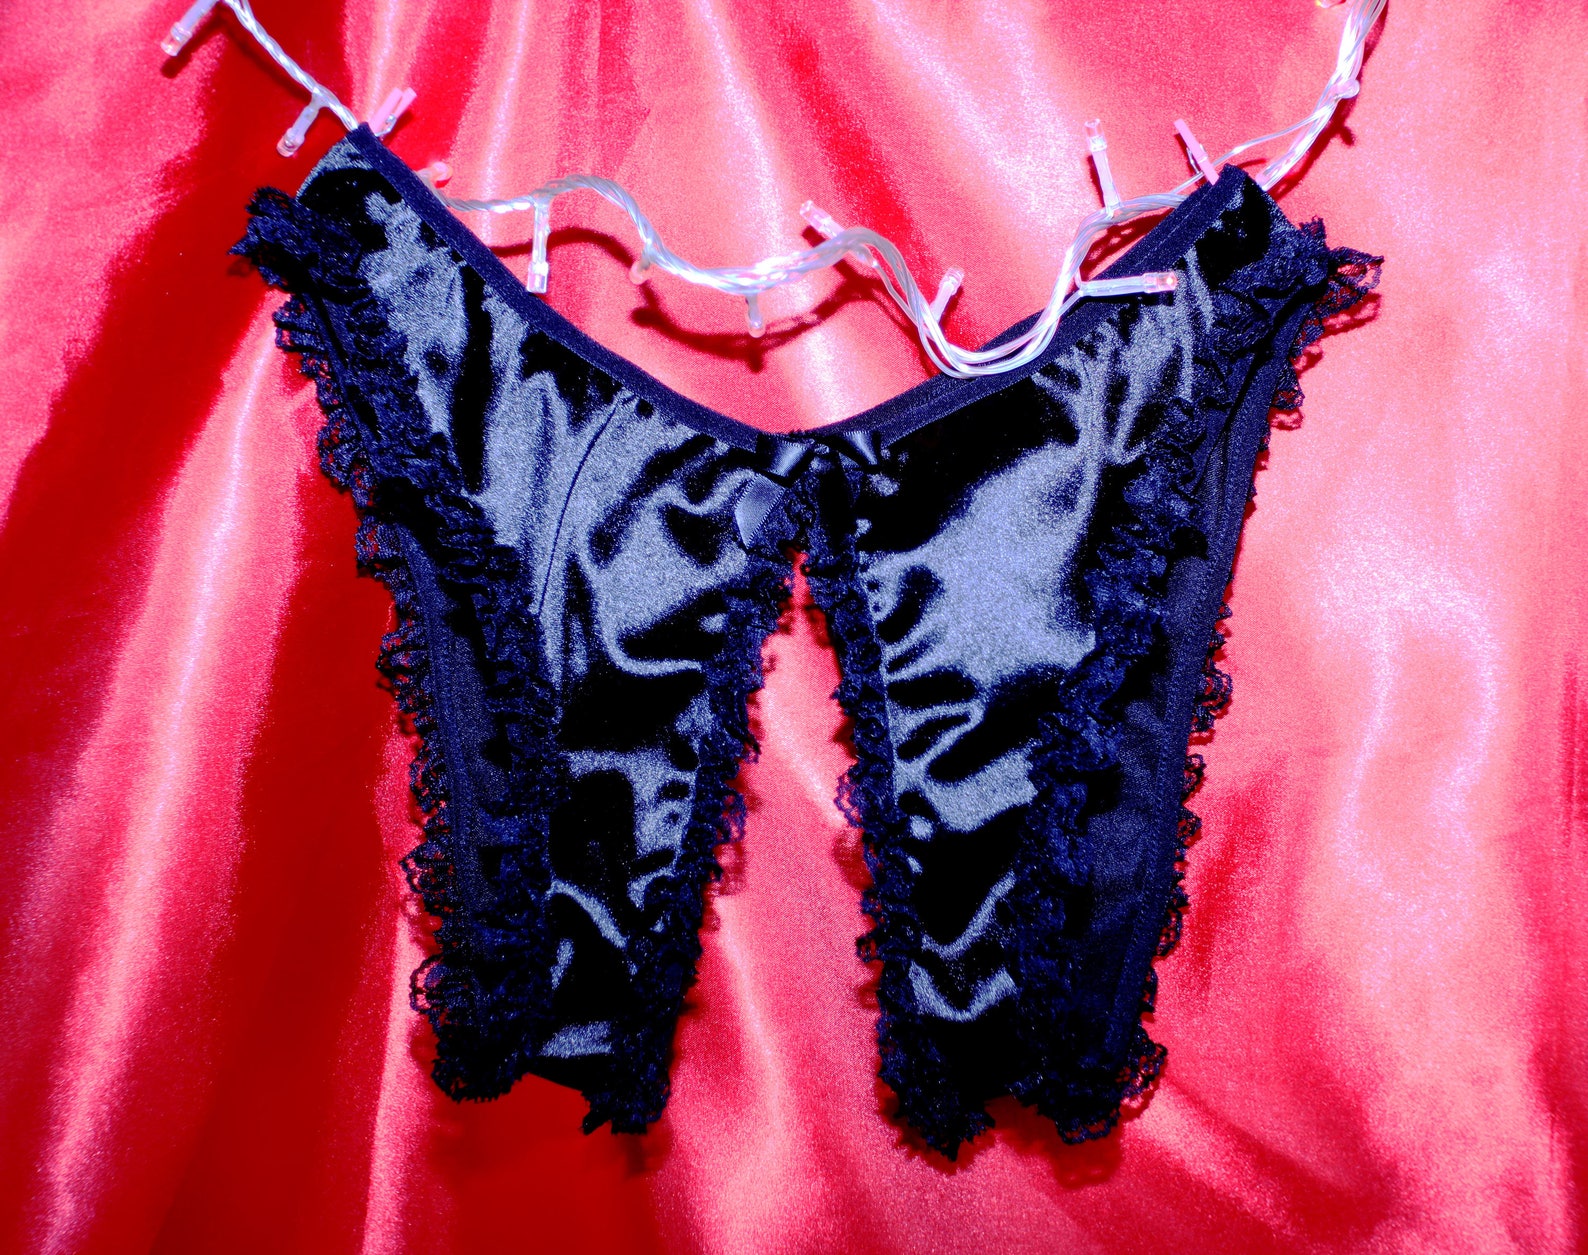 Black Satin And Frilly Lace Crotchless Bikini Panties Knickers Etsy 